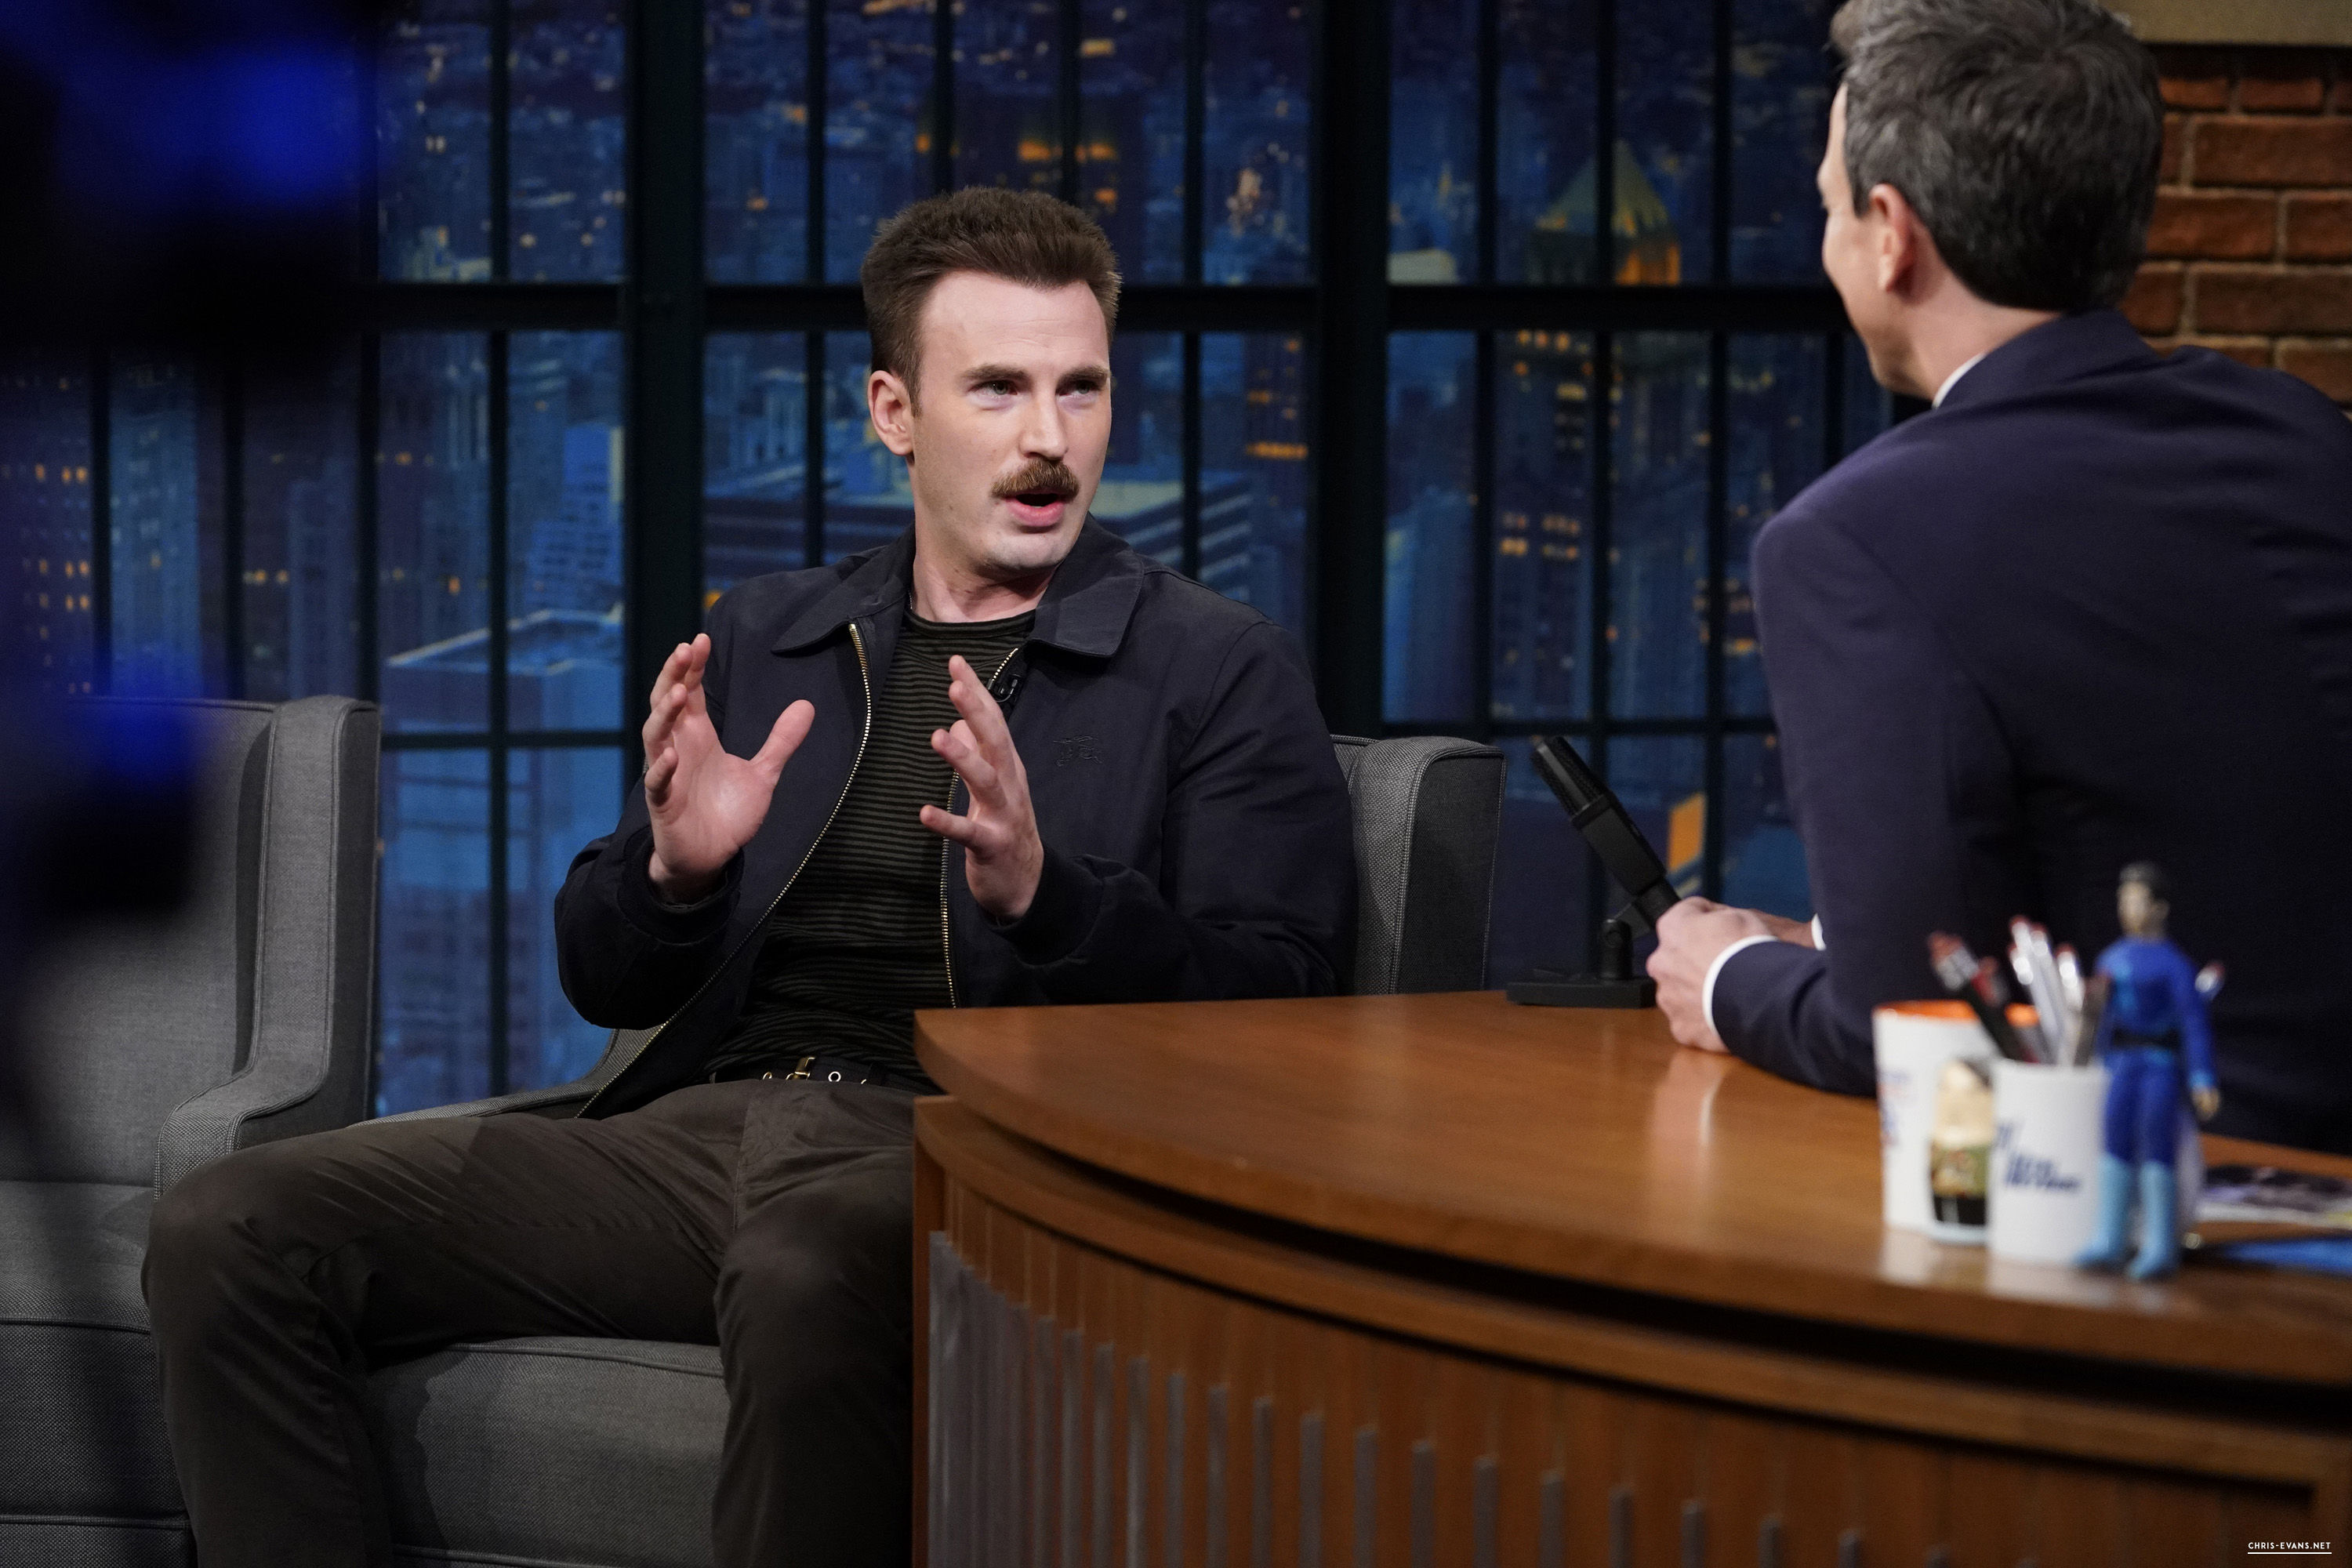 http://chris-evans.net/photos/albums/Appearances/2018/04%2023%20Late%20Night%20with%20Seth%20Meyers/003.jpg